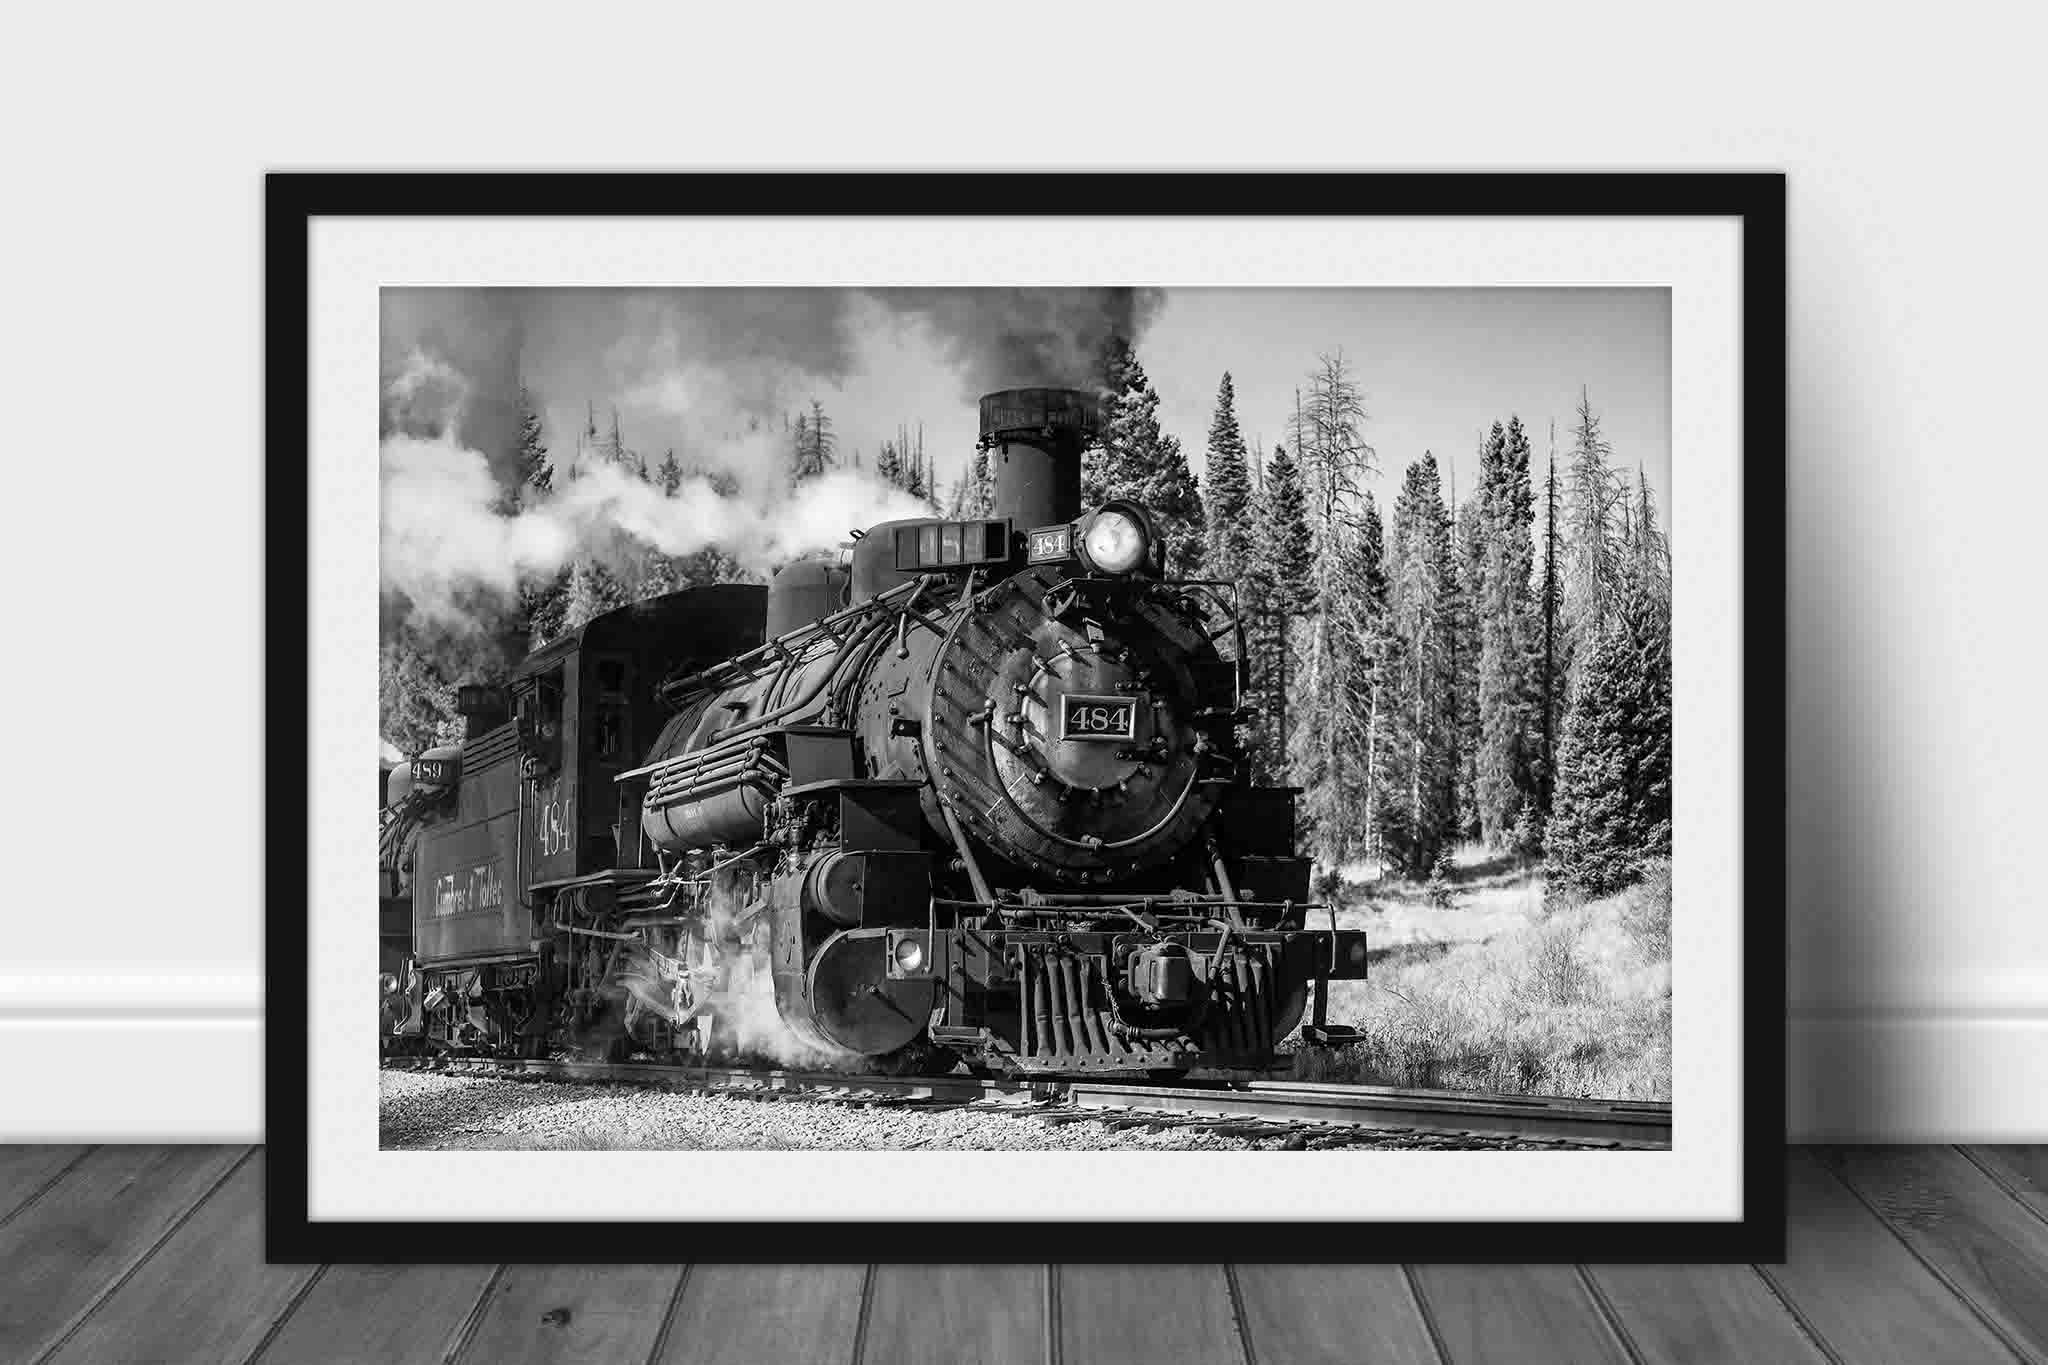 Framed black and white railroad print of a steam engine locomotive on a fall day in the Colorado Rocky Mountains by Sean Ramsey of Southern Plains Photography.